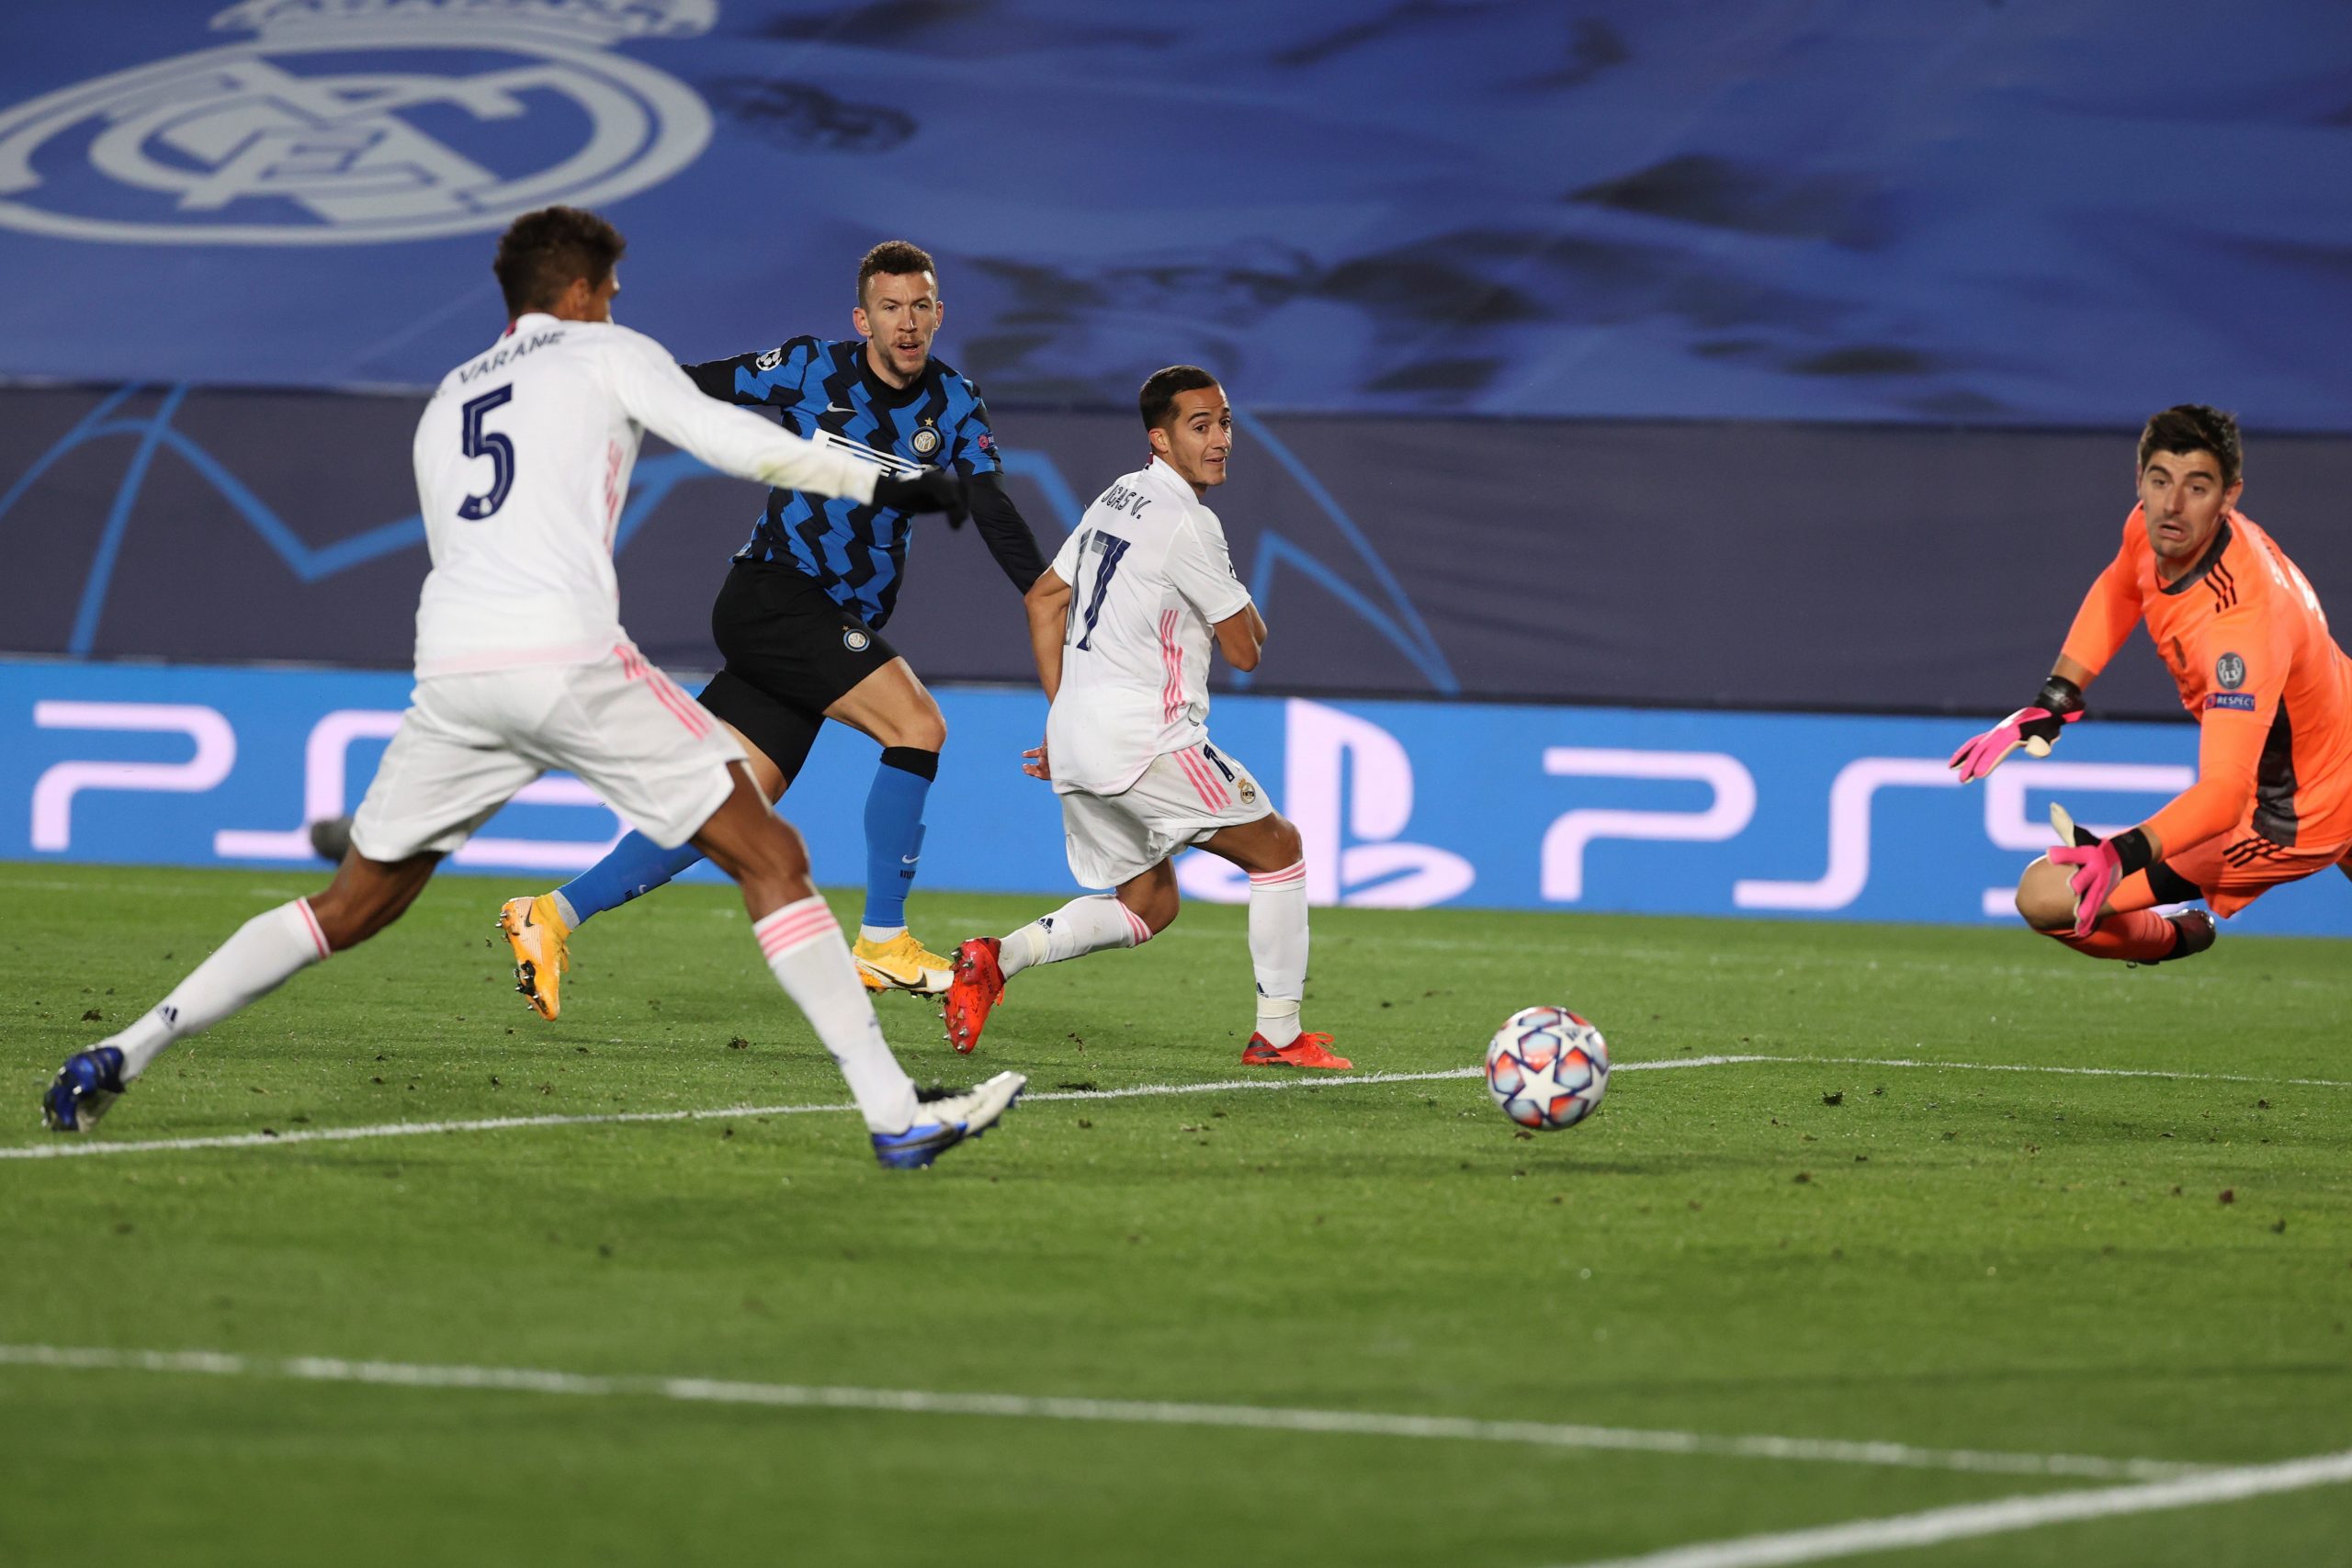 epa08796886 Internazionale's winger Ivan Perisic (2-L) scores the 2-2 during the UEFA Champions League group B match between Real Madrid and FC Internazionale at Alfredo Di Stefano stadium in Madrid, Spain, 03 November 2020.  EPA/JuanJo Martin